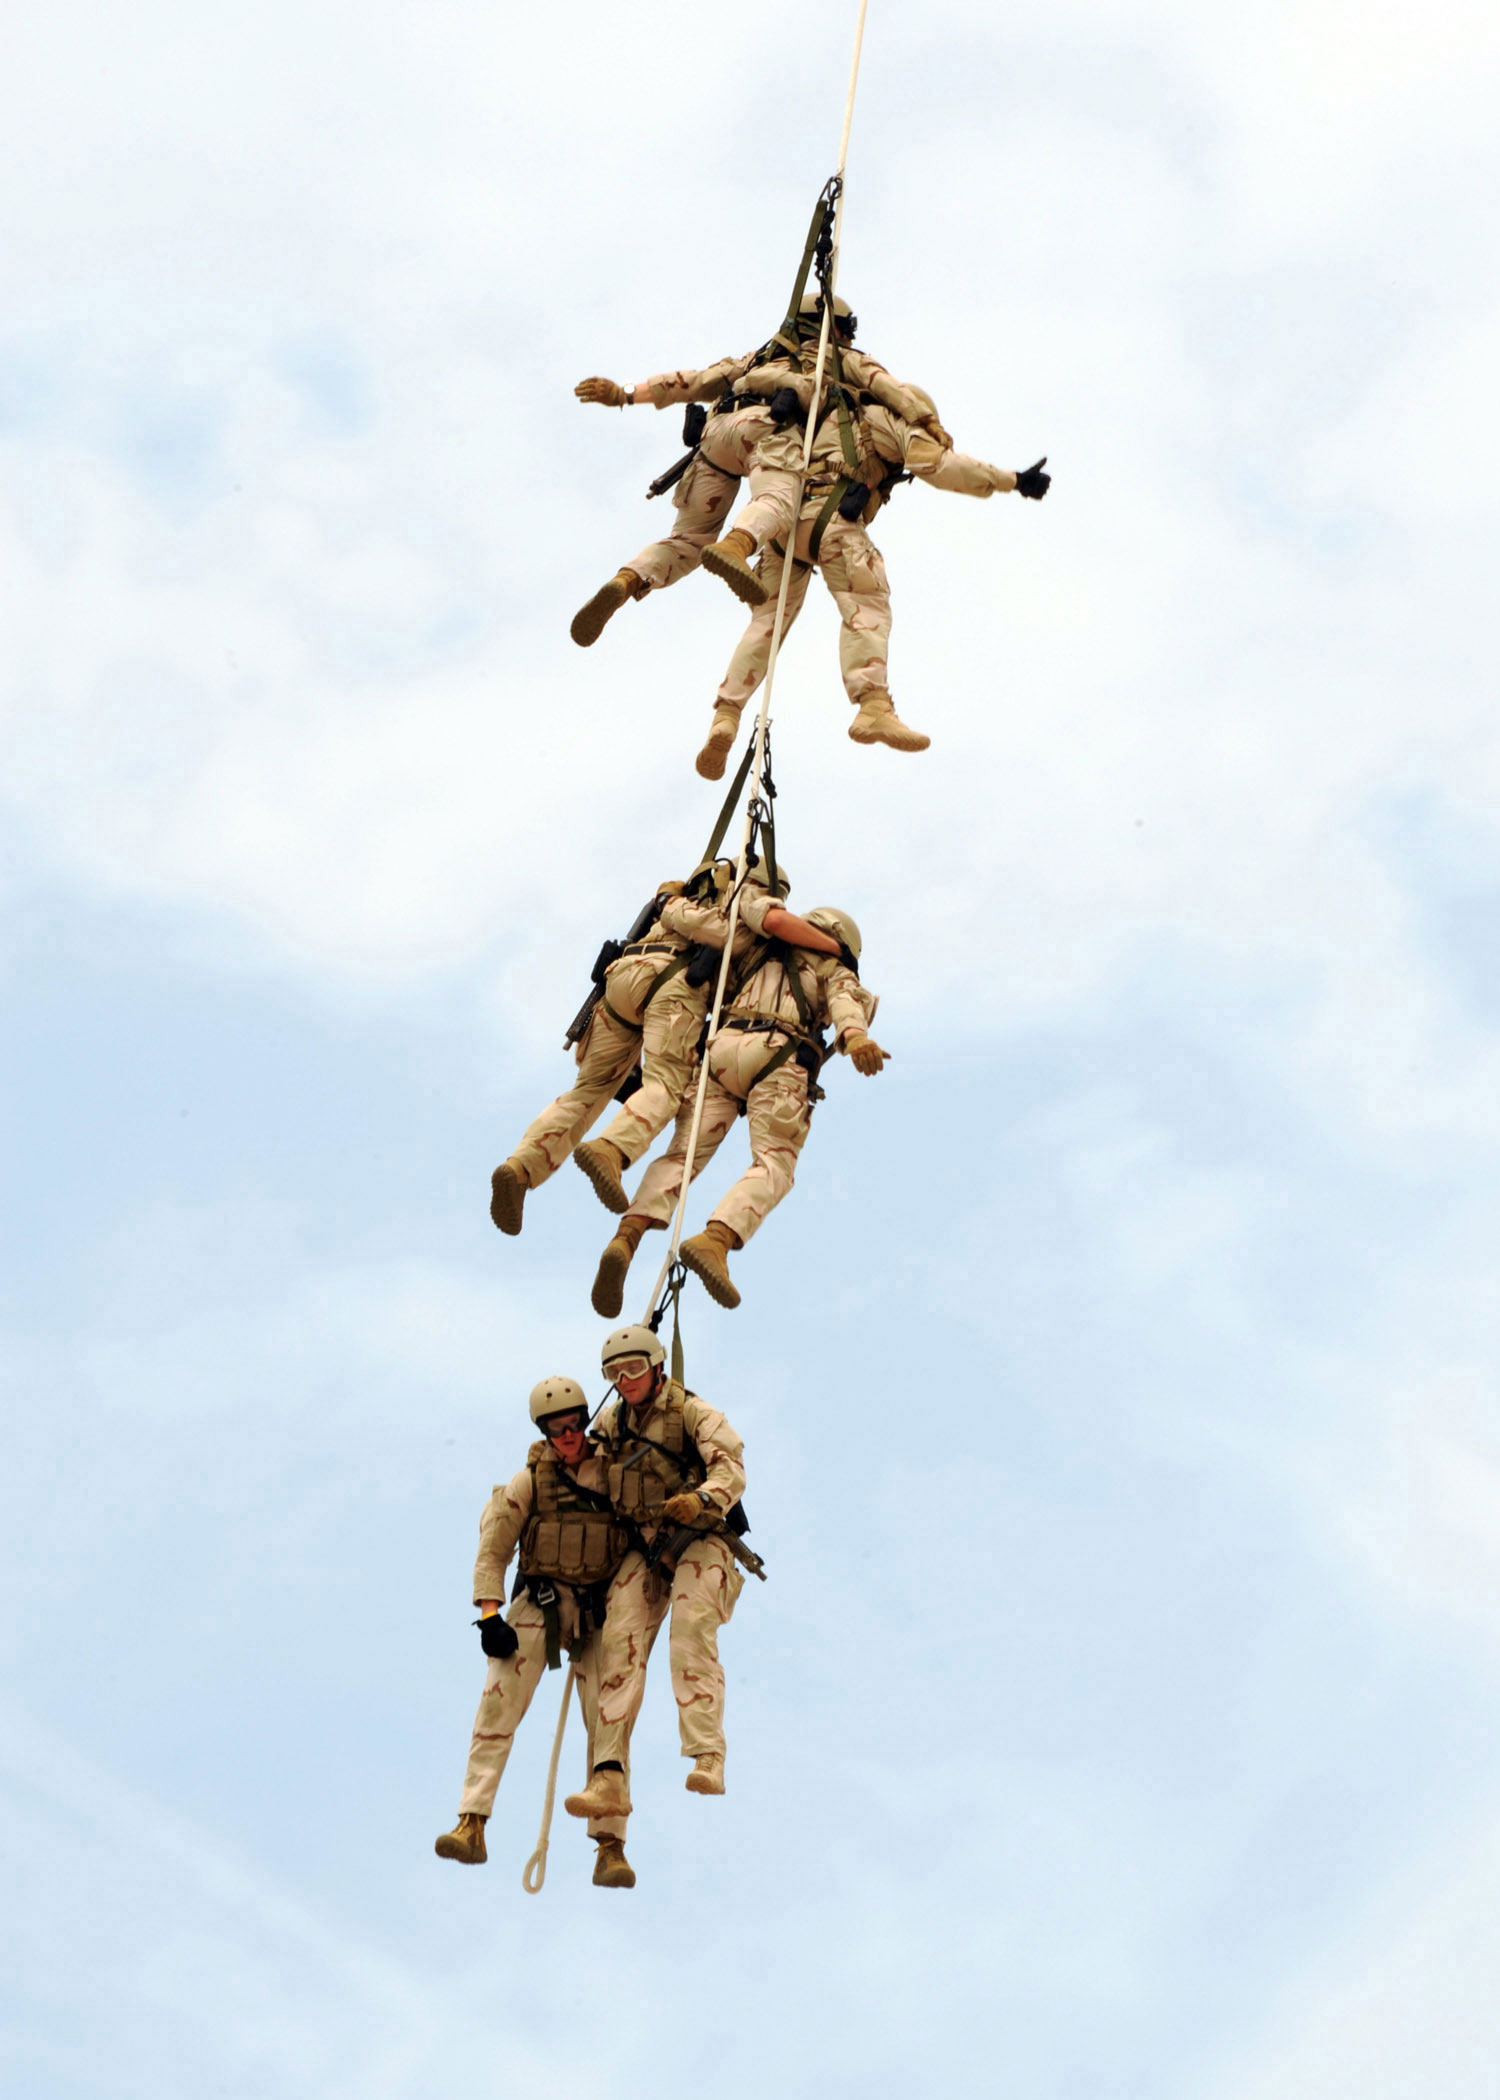 SEALs - Special Patrol Insertion & Extraction System (SPIES)